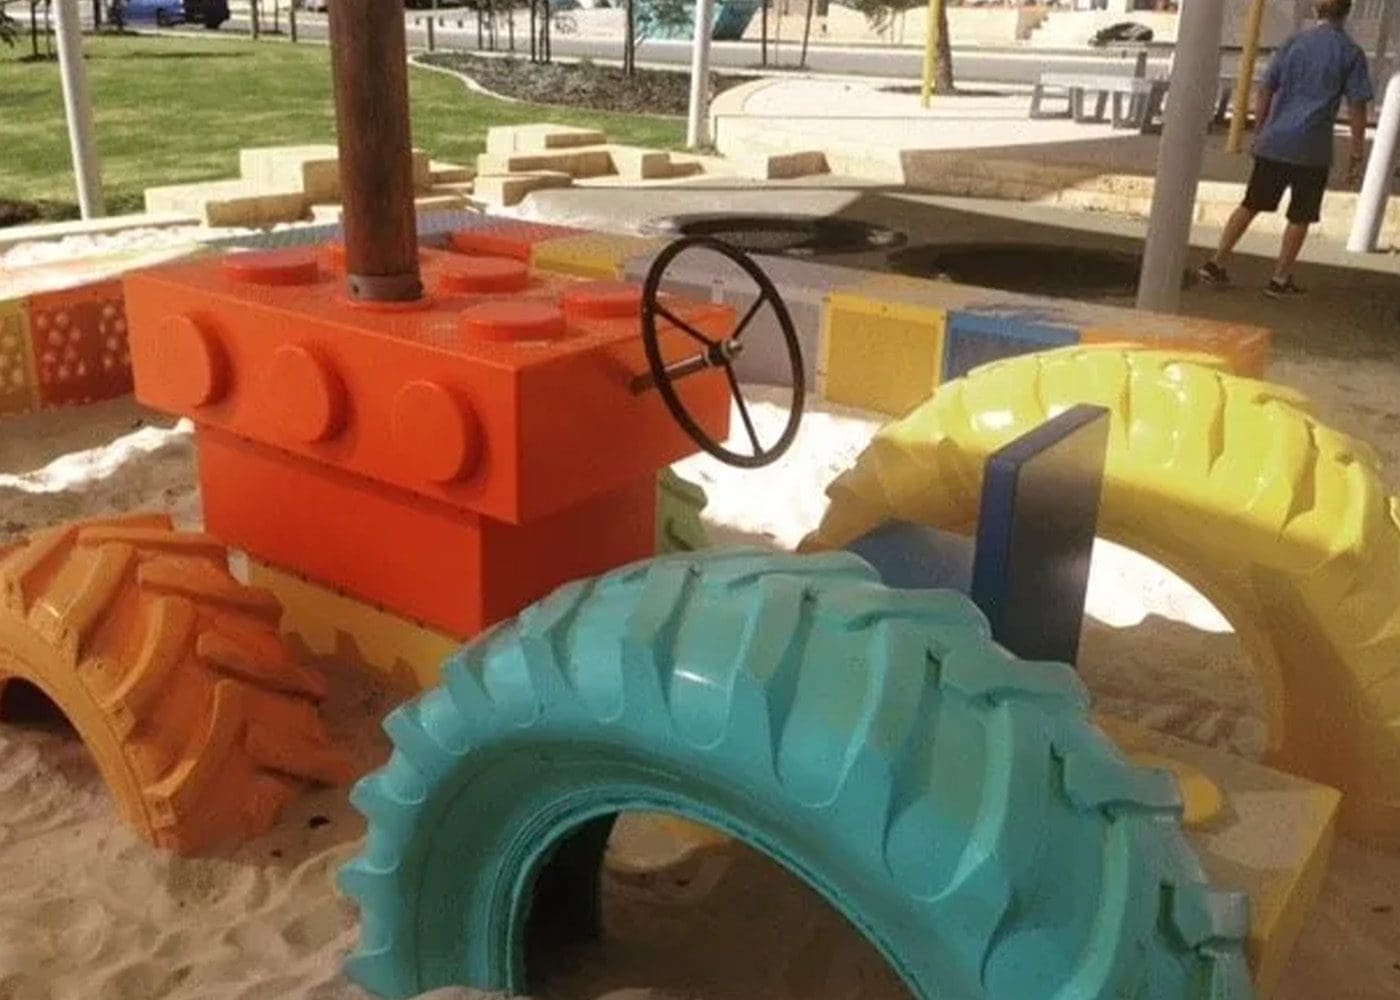 Plastic tractor in a playground.